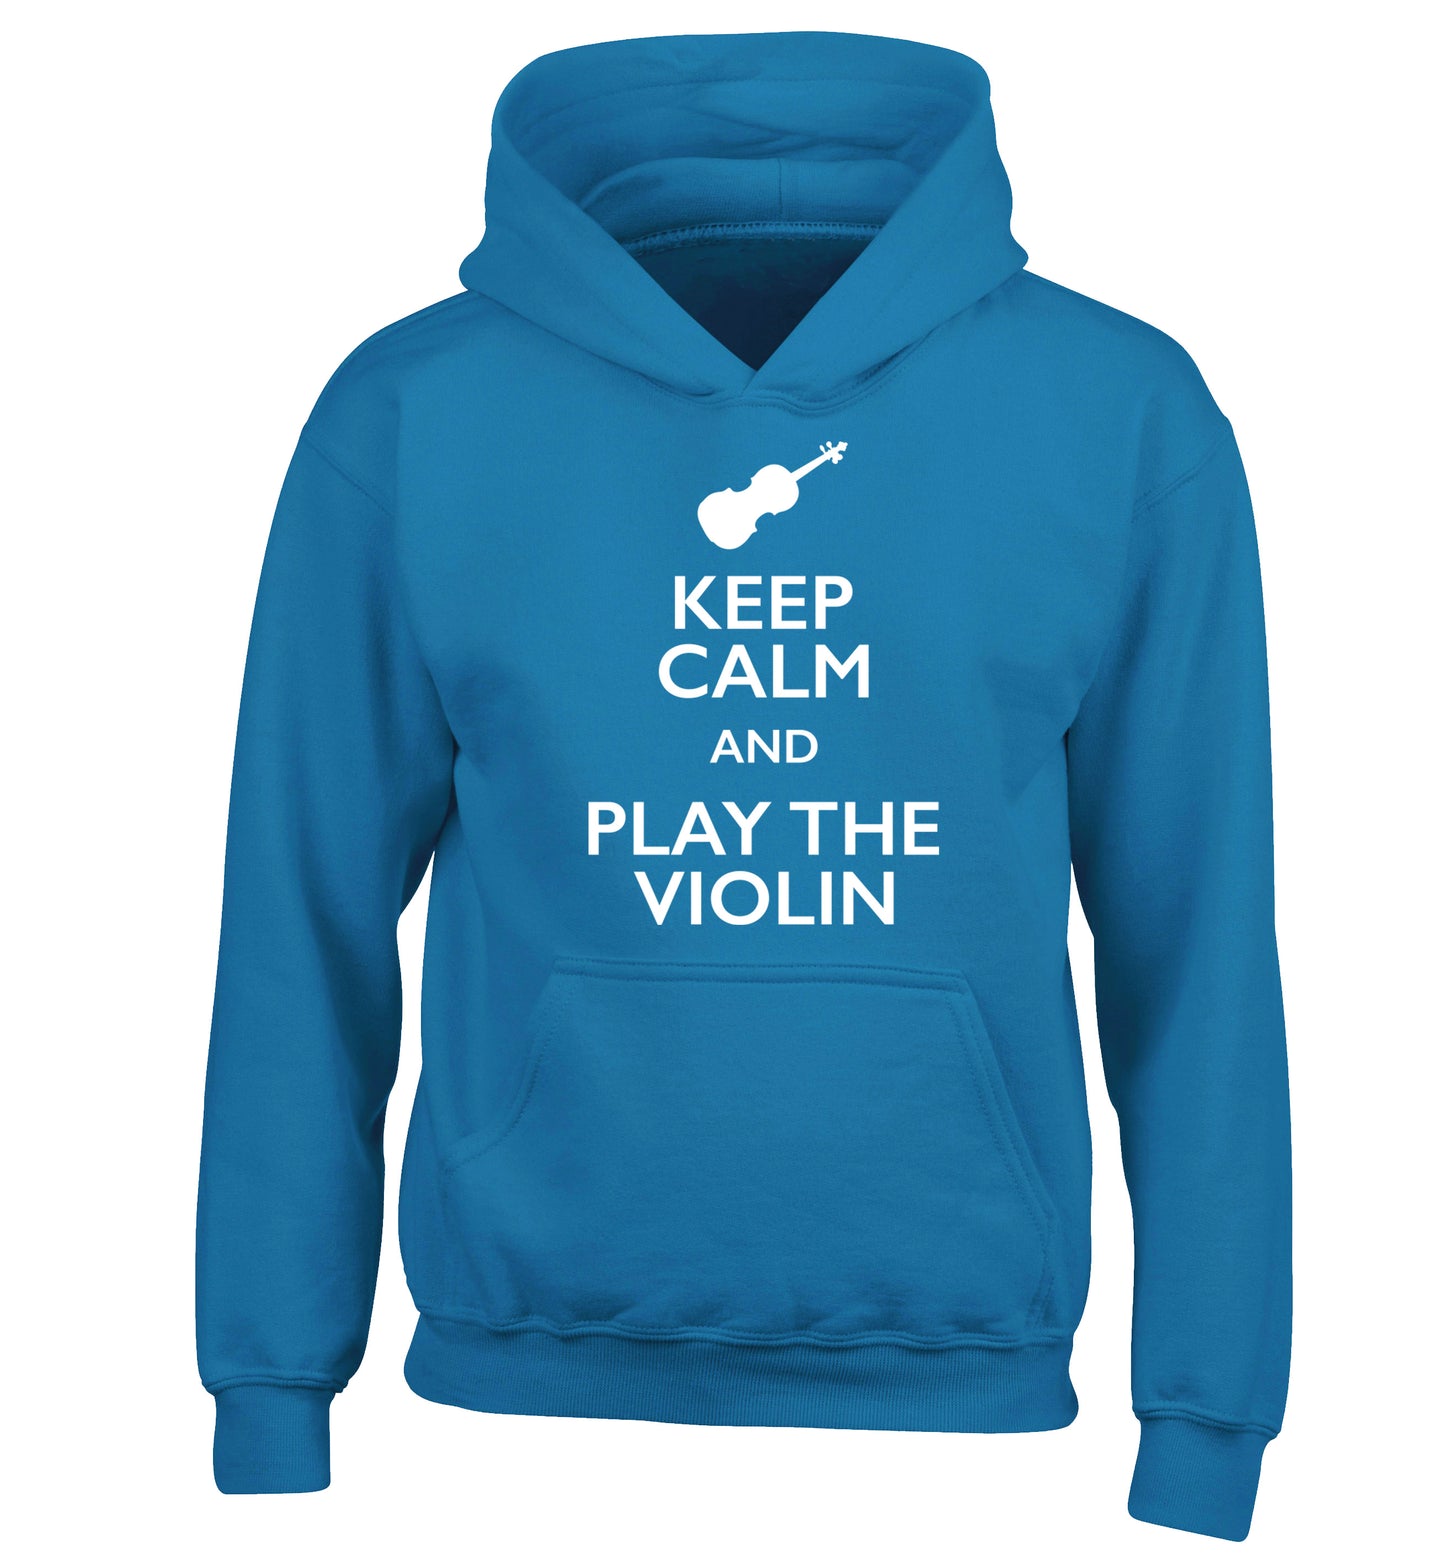 Keep calm and play the violin children's blue hoodie 12-13 Years